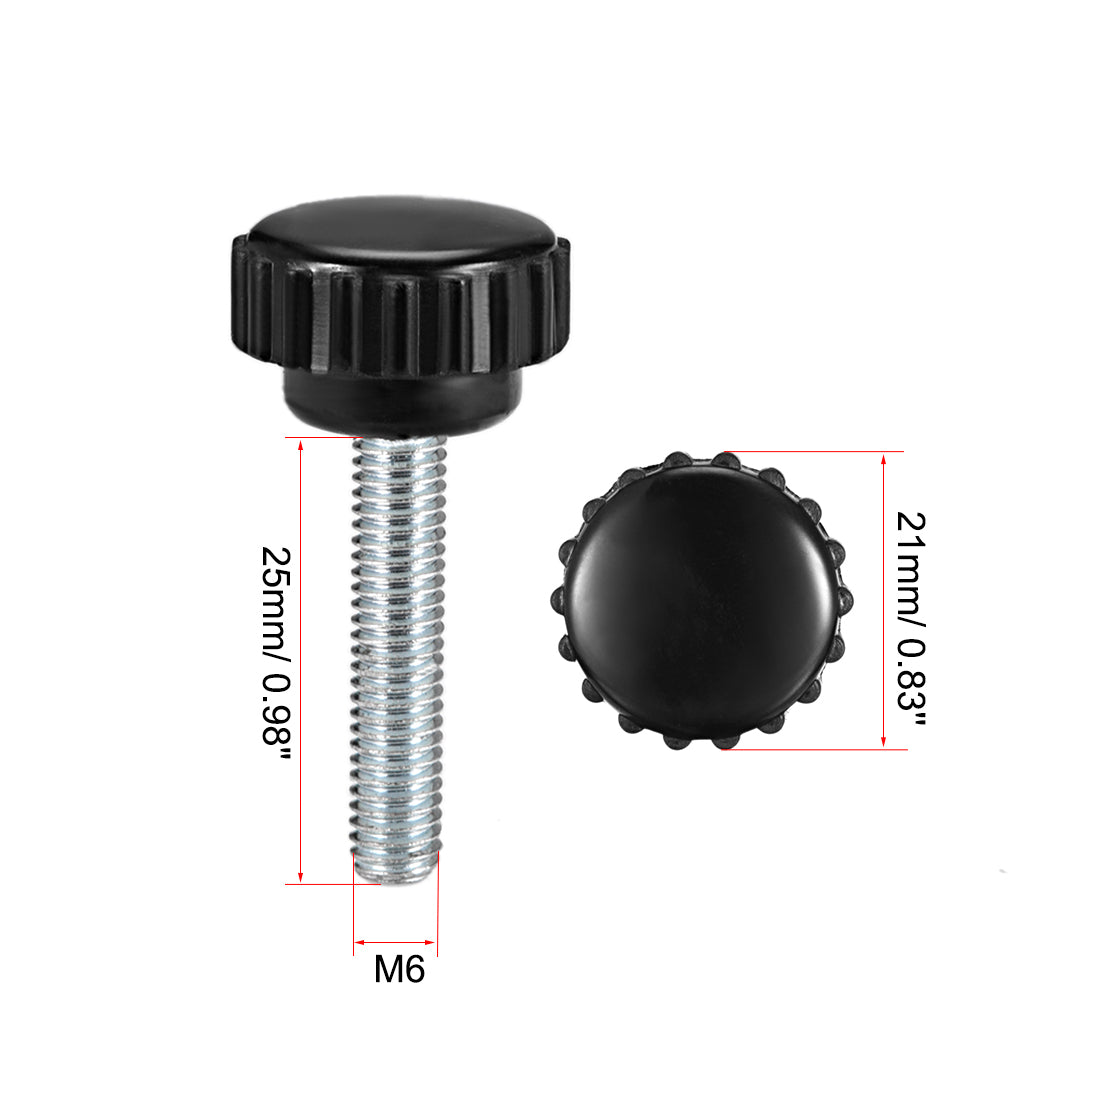 Uxcell Uxcell M5 x 30mm Male Thread Knurled Clamping Knobs Grip Thumb Screw on Type 12 Pcs